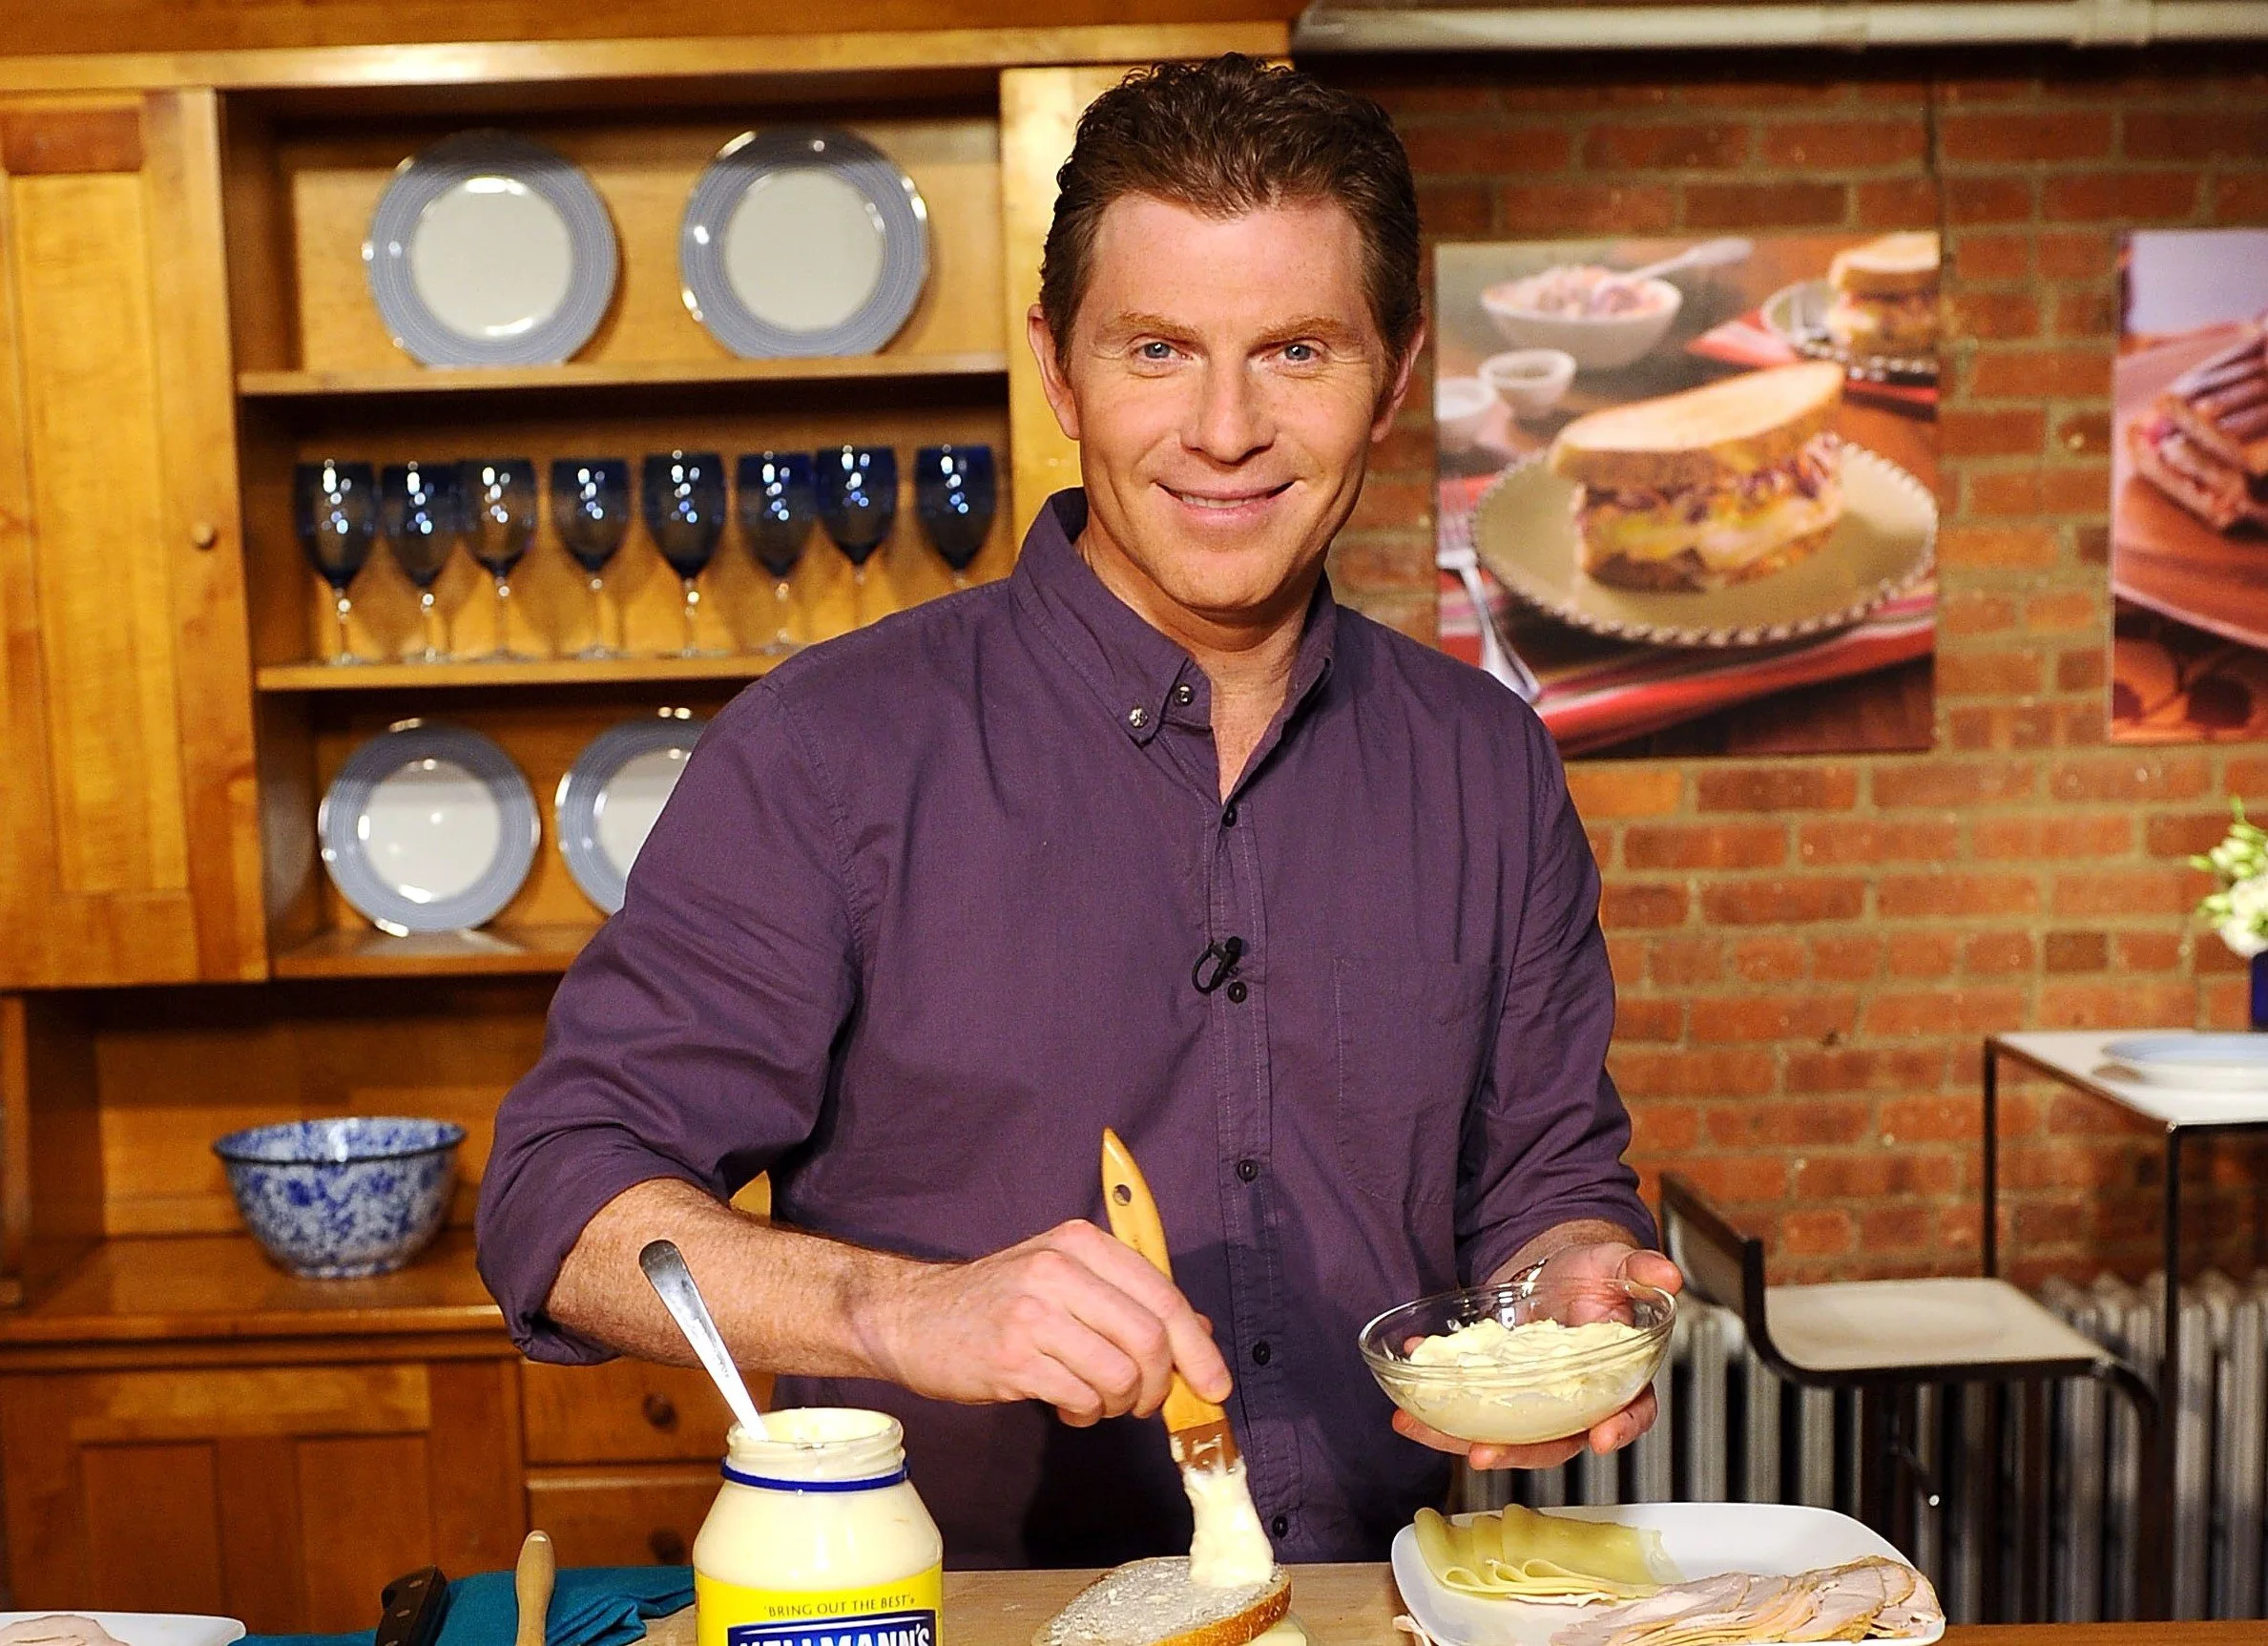 Bobby Flay Net Worth In 2022 - Restaurant Career, Lifestyle And Interesting Facts You Need To Know About “Iron Chef Flay”